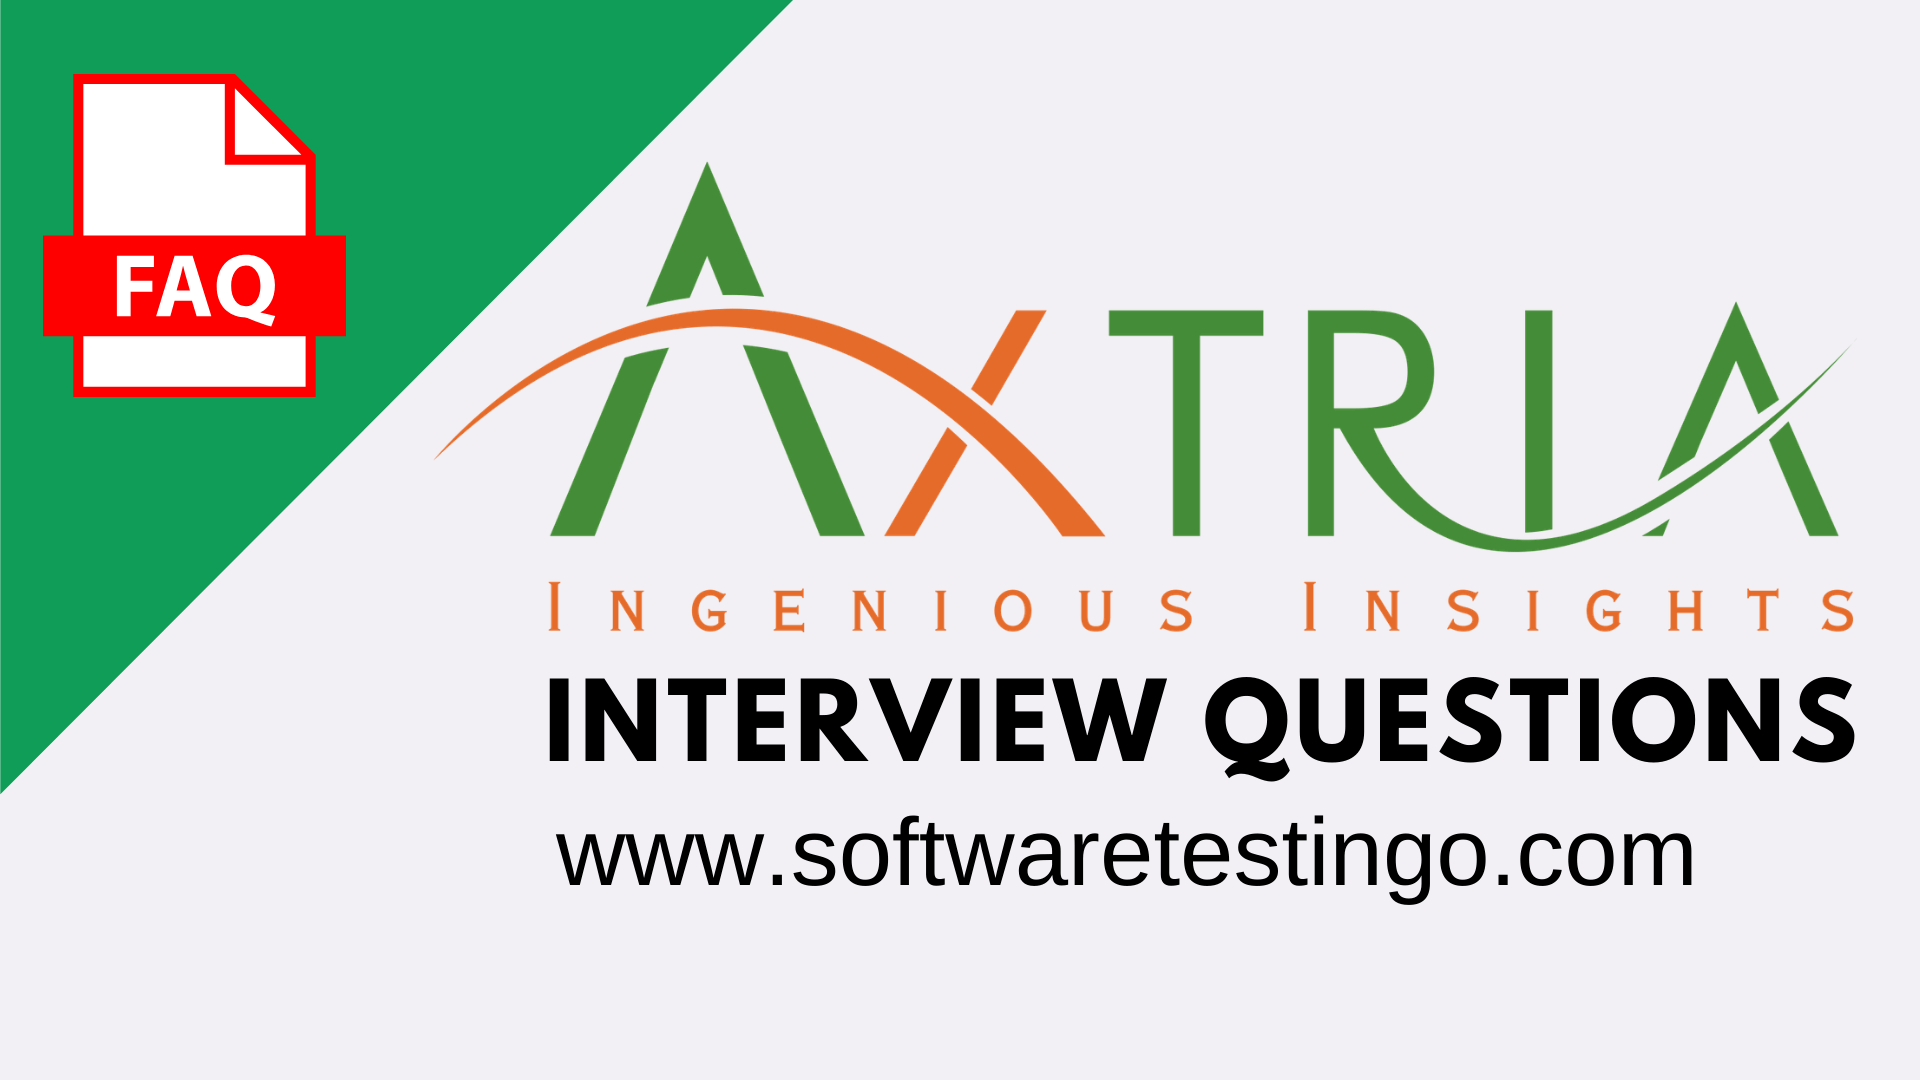 Axtria Interview Questions